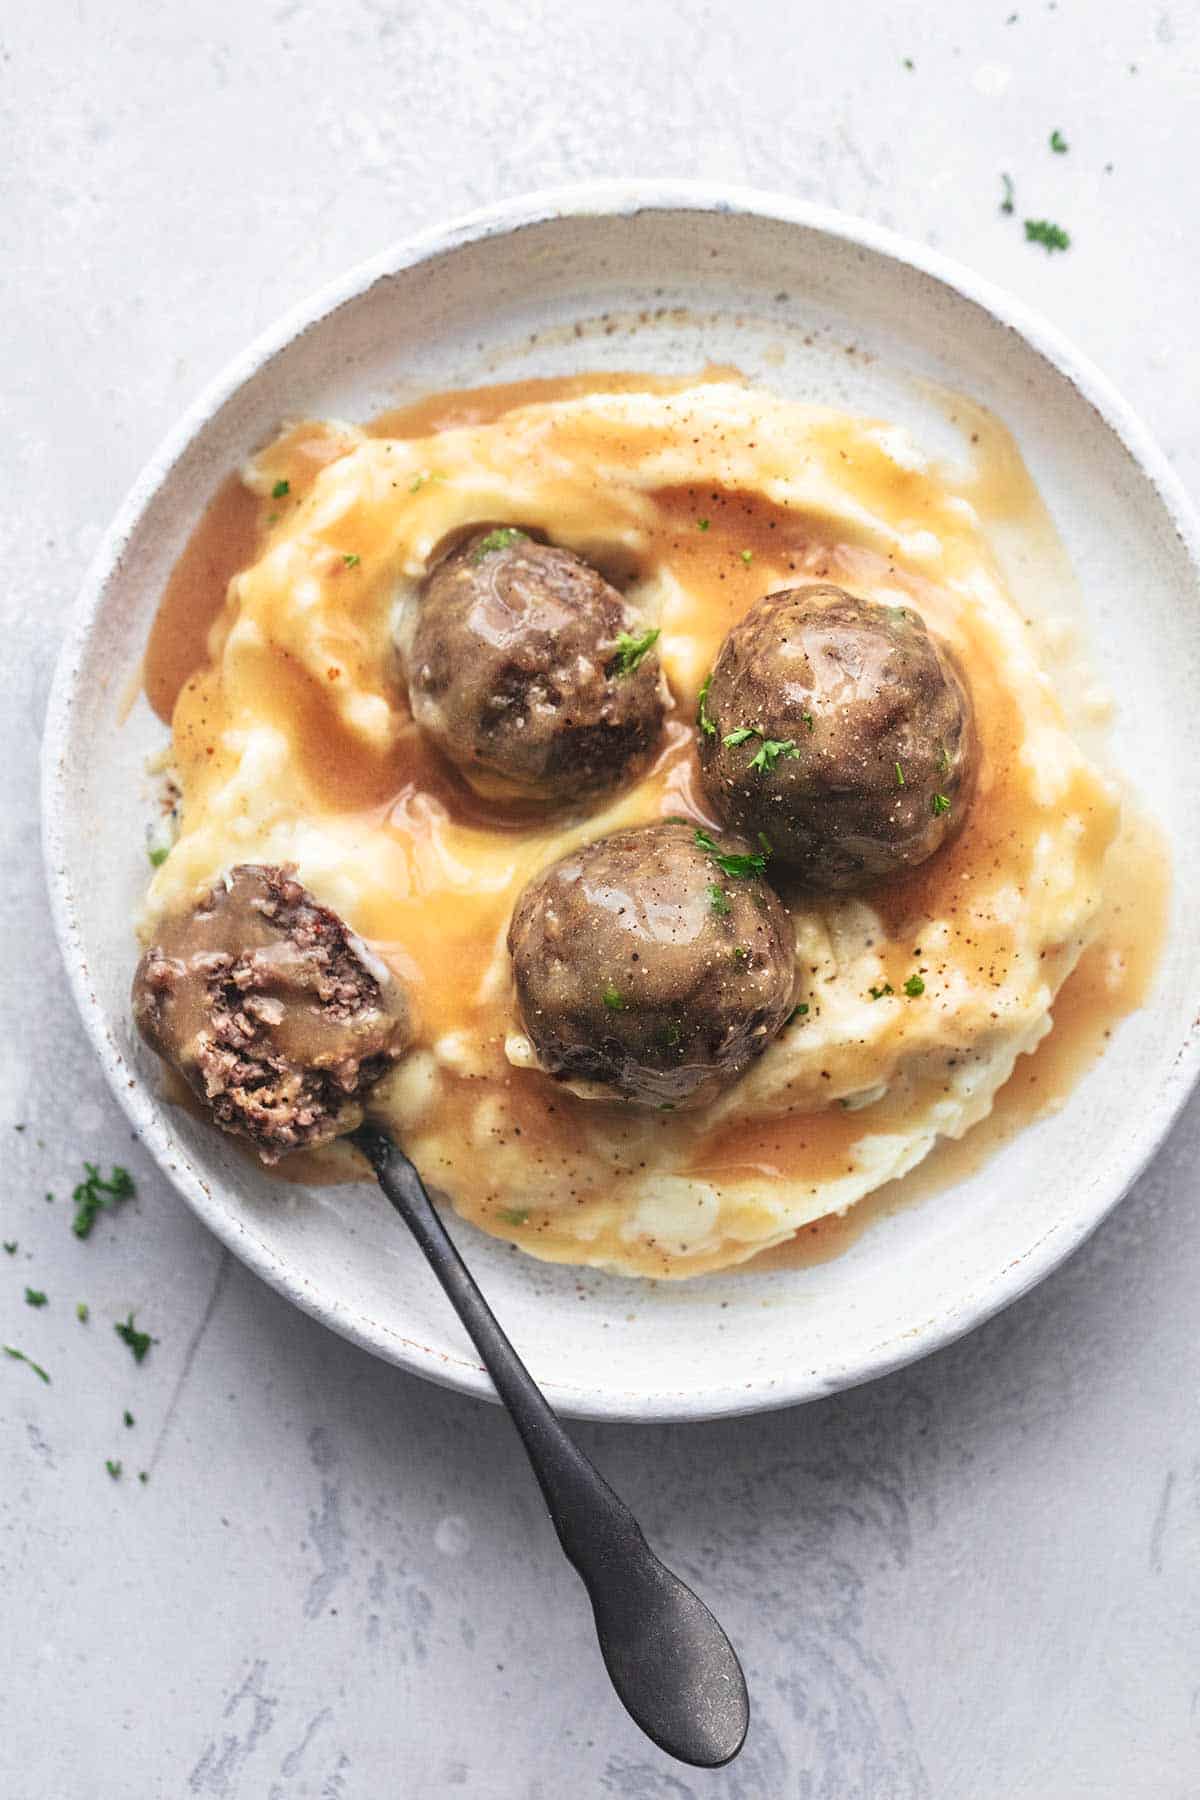 top view of baked meatballs on mashed potatoes and gravy with half of a meatball on a fork on the side all on a plate.